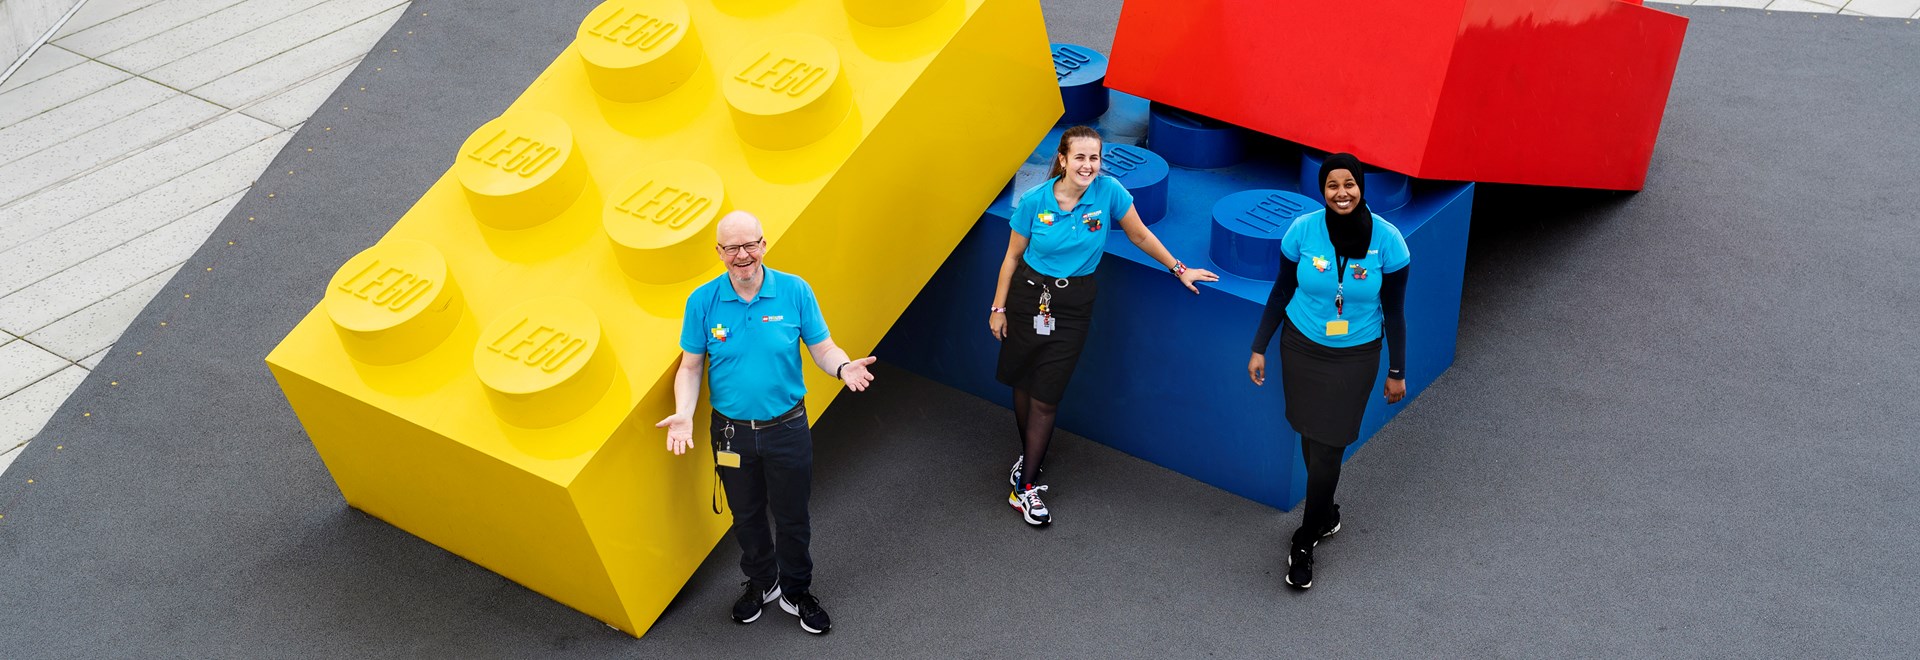 Bring your family to LEGO House - plan your visit here